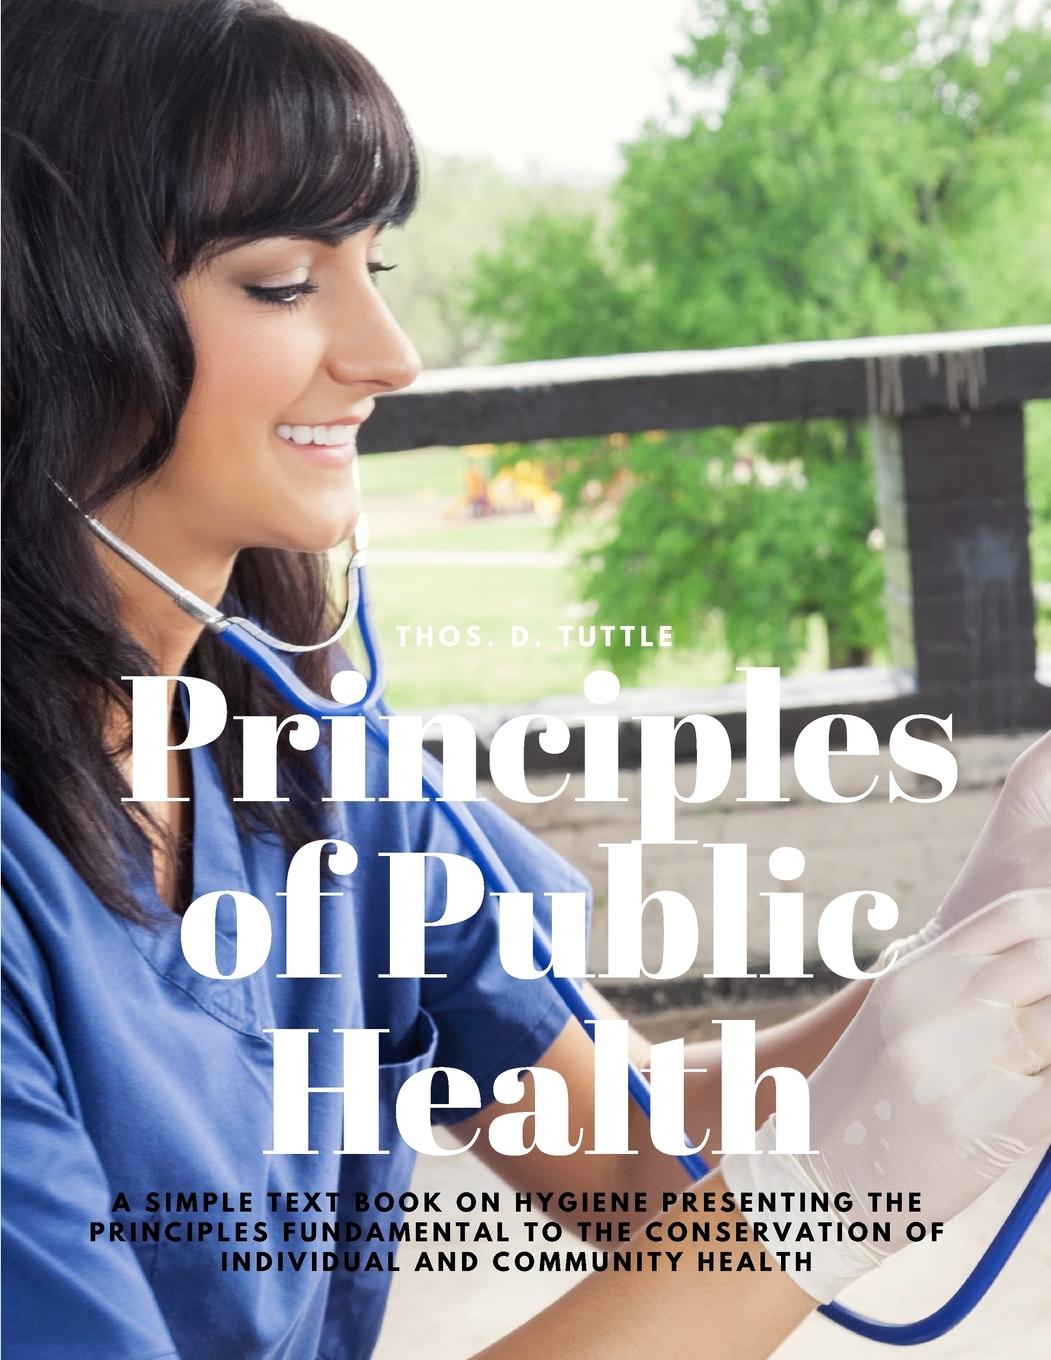 Книга Principles of Public Health - A Simple Text Book on Hygiene Presenting the Principles Fundamental to the Conservation of Individual and Community Heal 